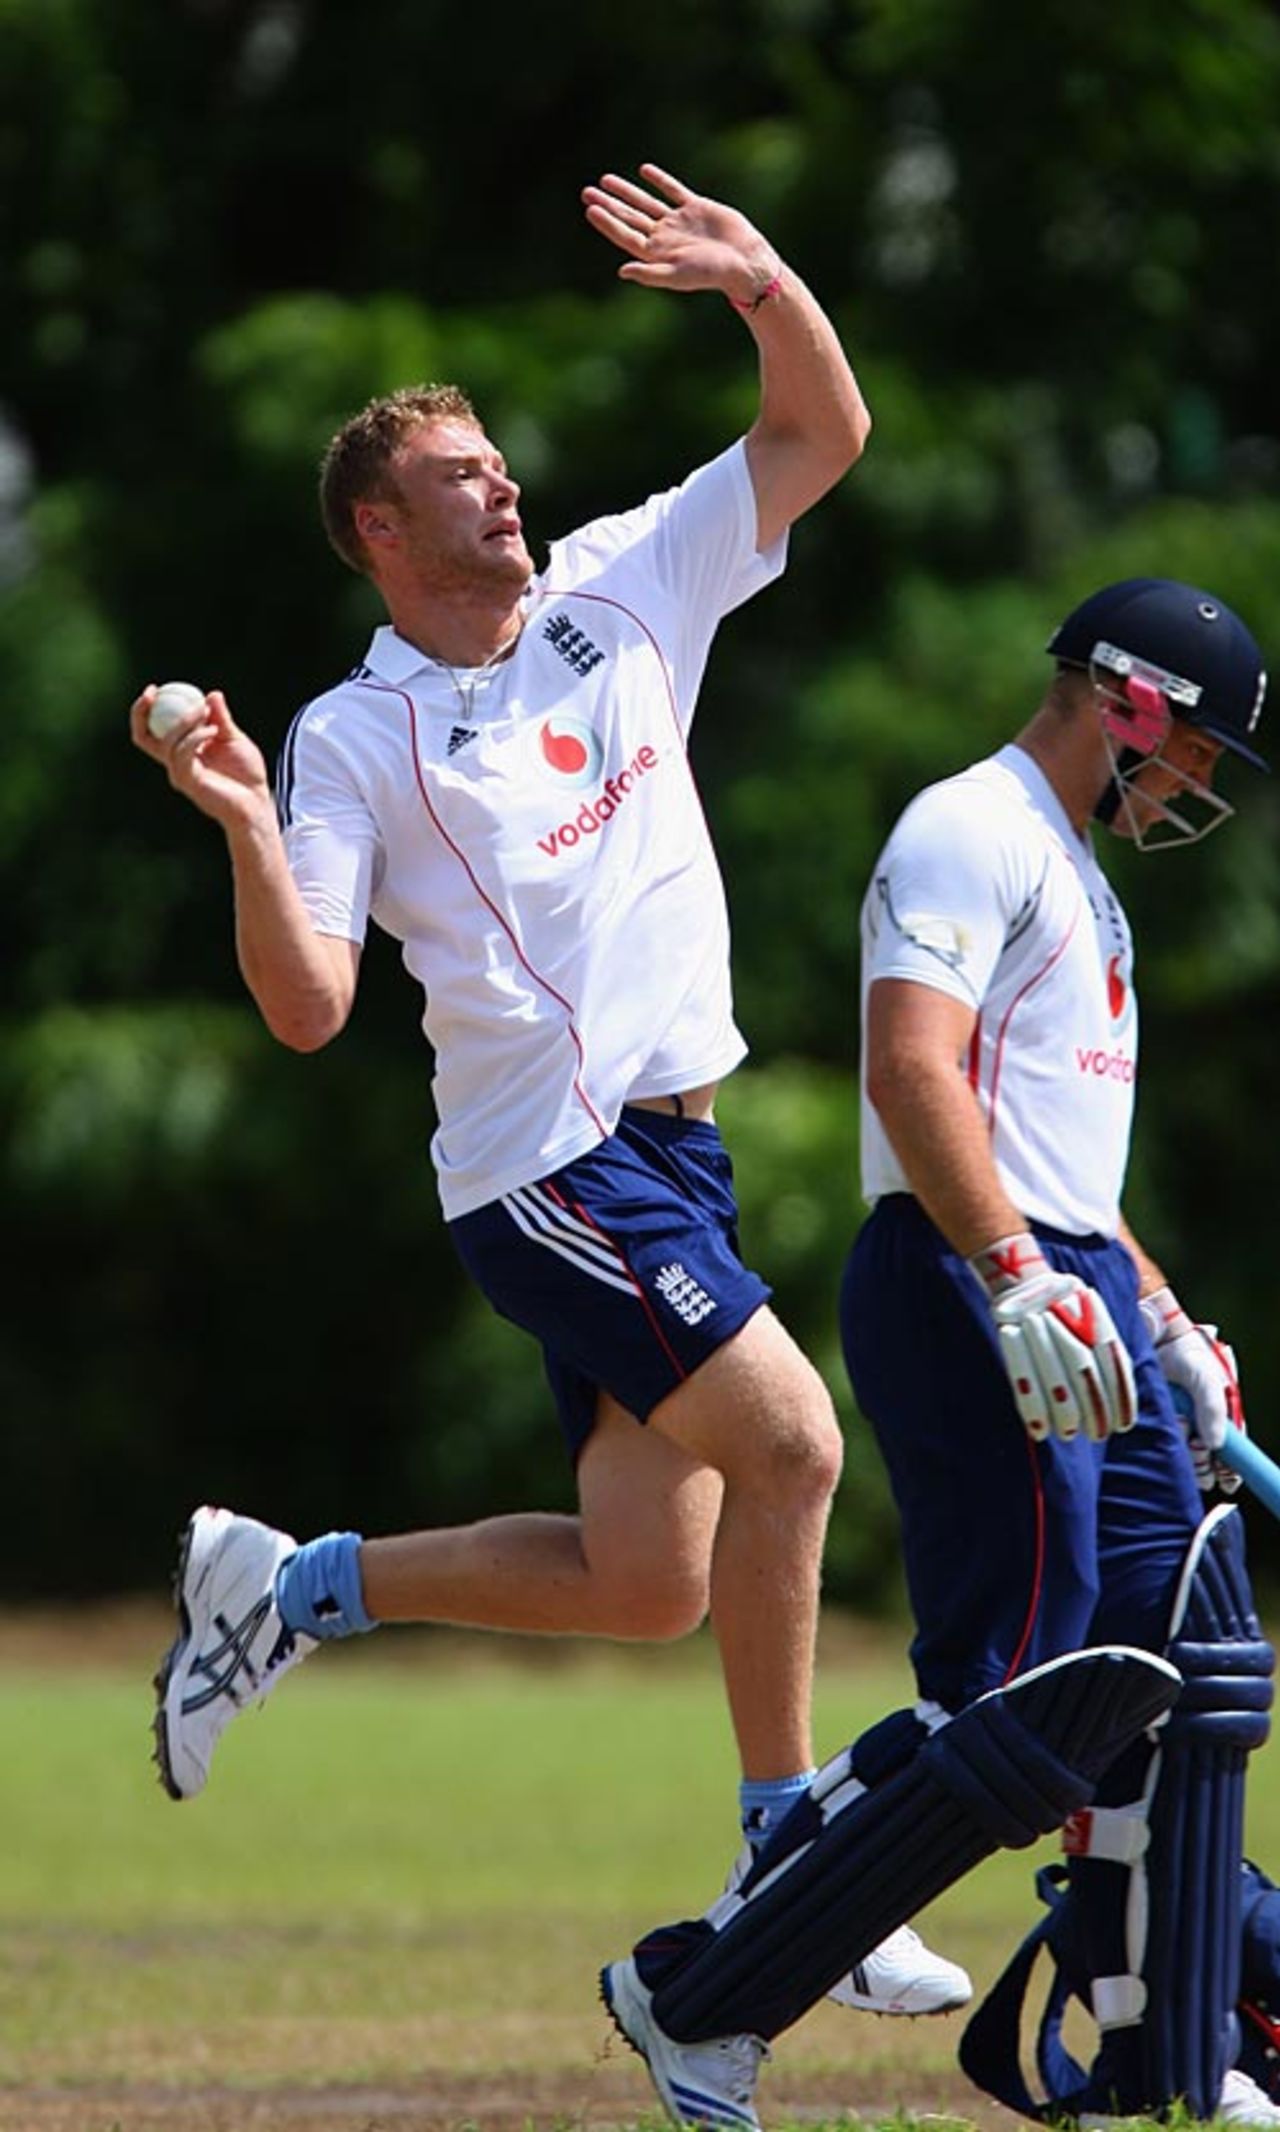 Andrew Flintoff steams in during practice, Stanford 20/20 for 20, Antigua, October 30, 2008